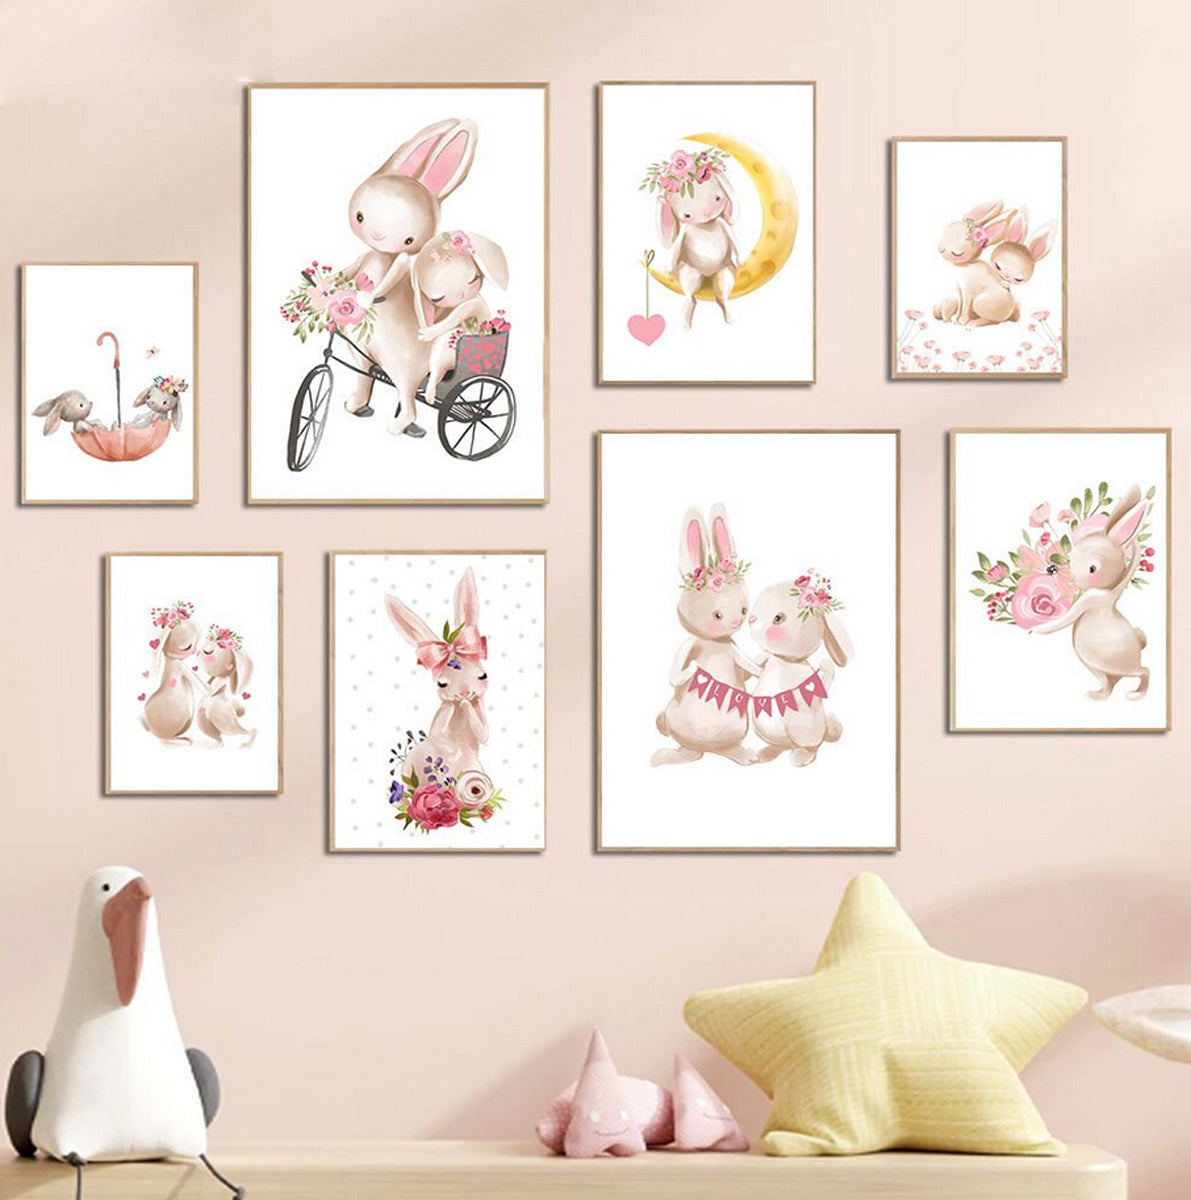 TPFLiving Poster Rabbit Rabbit Moon, the / Traumpreisfabrik Umbr Baby Canvas – in on with